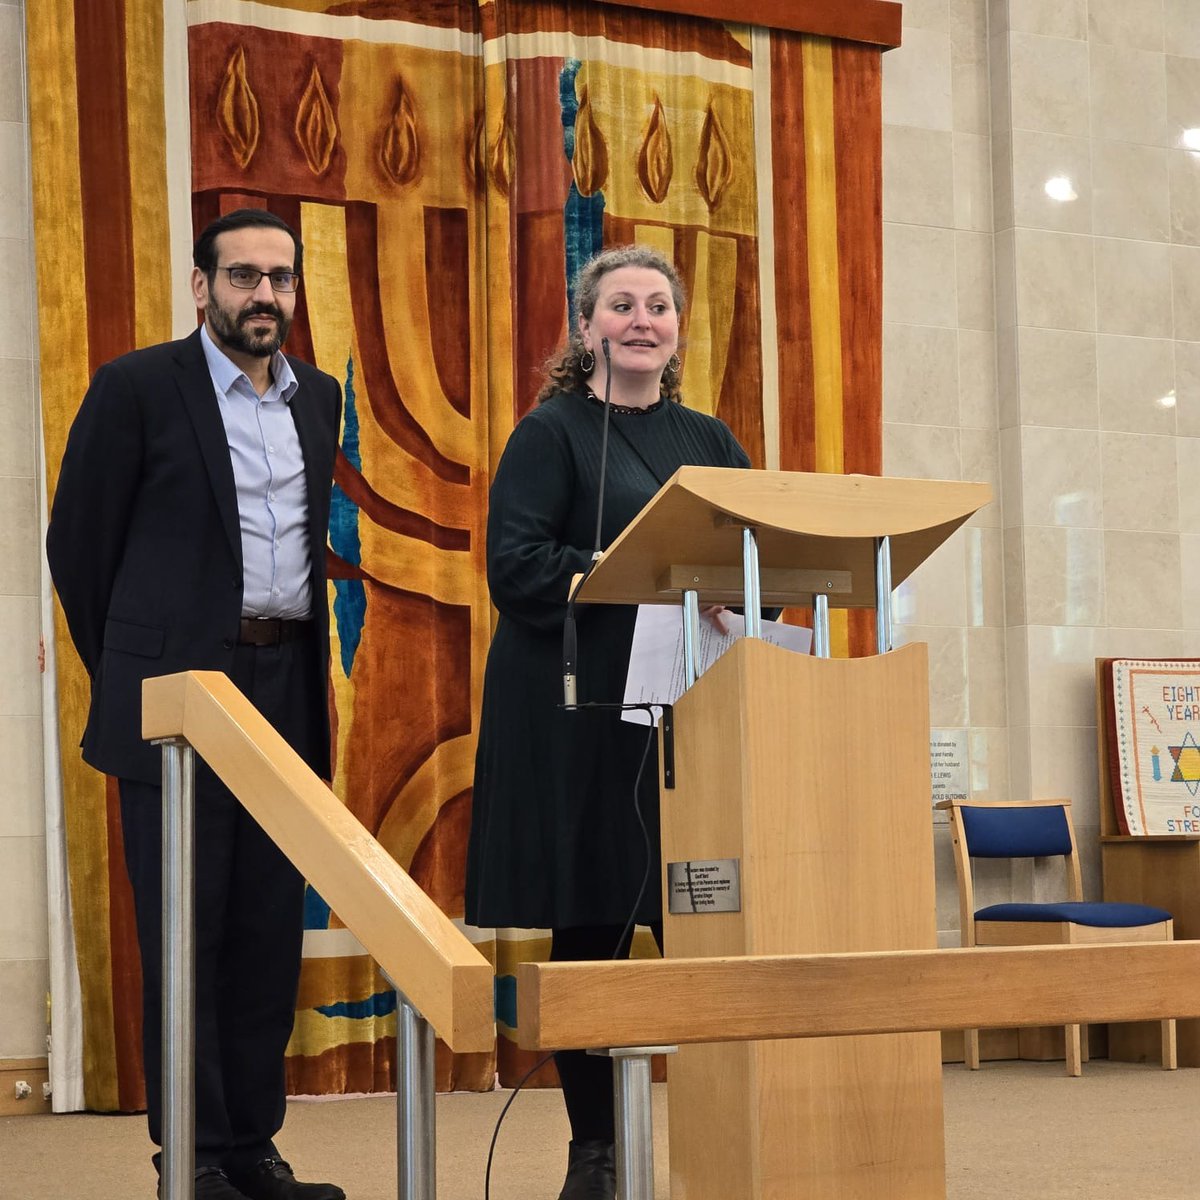 Edgware and Hendon Reform Synagogue joined with Faiths Forum for London to host an Iftar – which saw 100 people from local Jewish and Muslim communities come together. Pictured are @Rabbi_Debbie of @ehrs3549 and @mustafafield of @londonfaiths. Story: loom.ly/sFs49zY